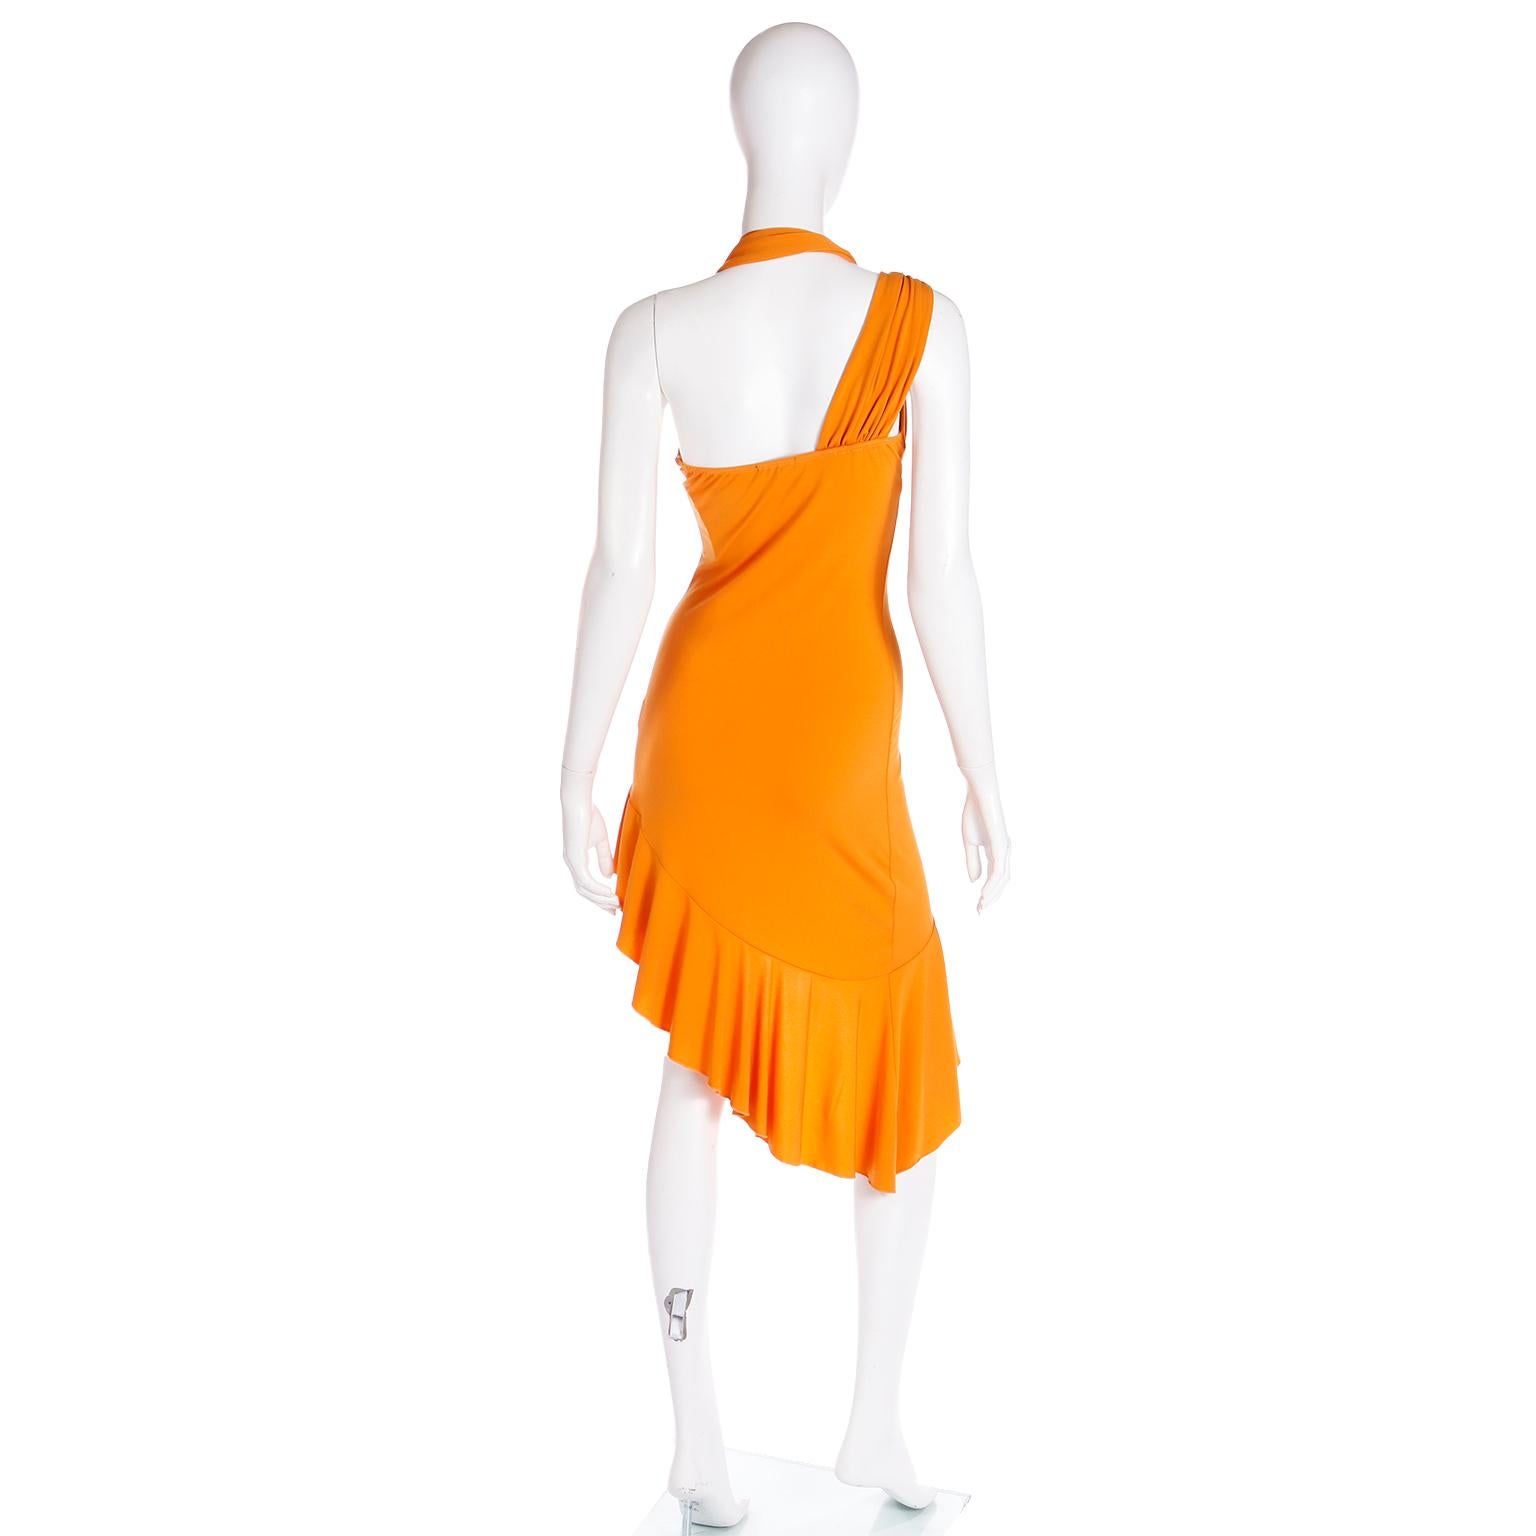 Gianni Versace Tangerine Orange Vintage Stretch Knit Asymmetrical Dress In Excellent Condition For Sale In Portland, OR